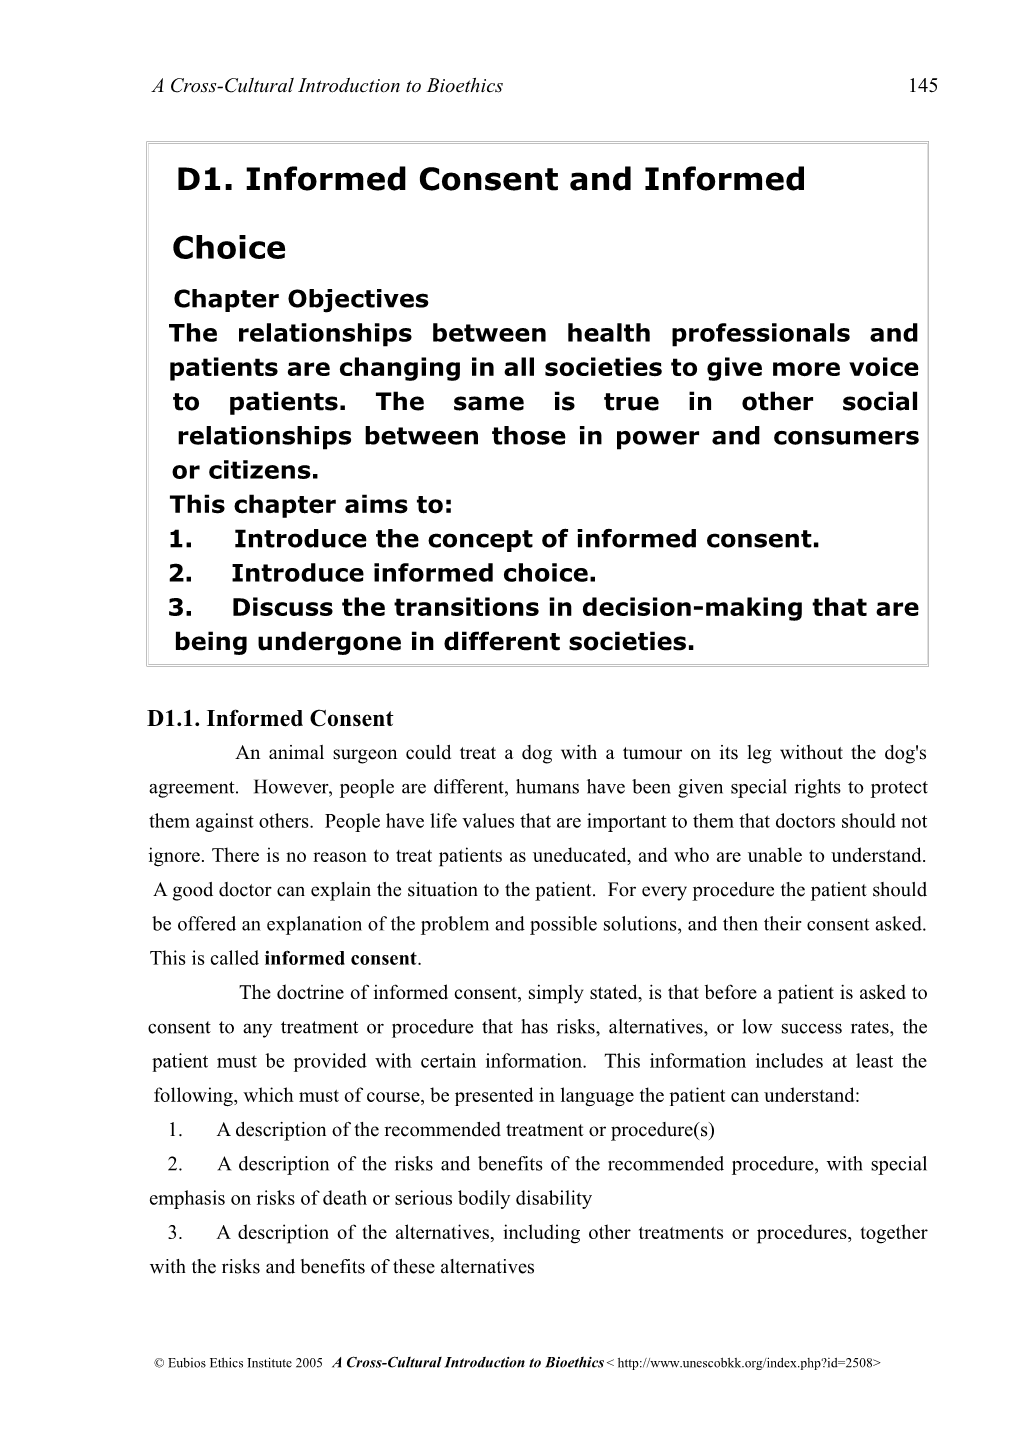 D1. Informed Consent and Informed Choice